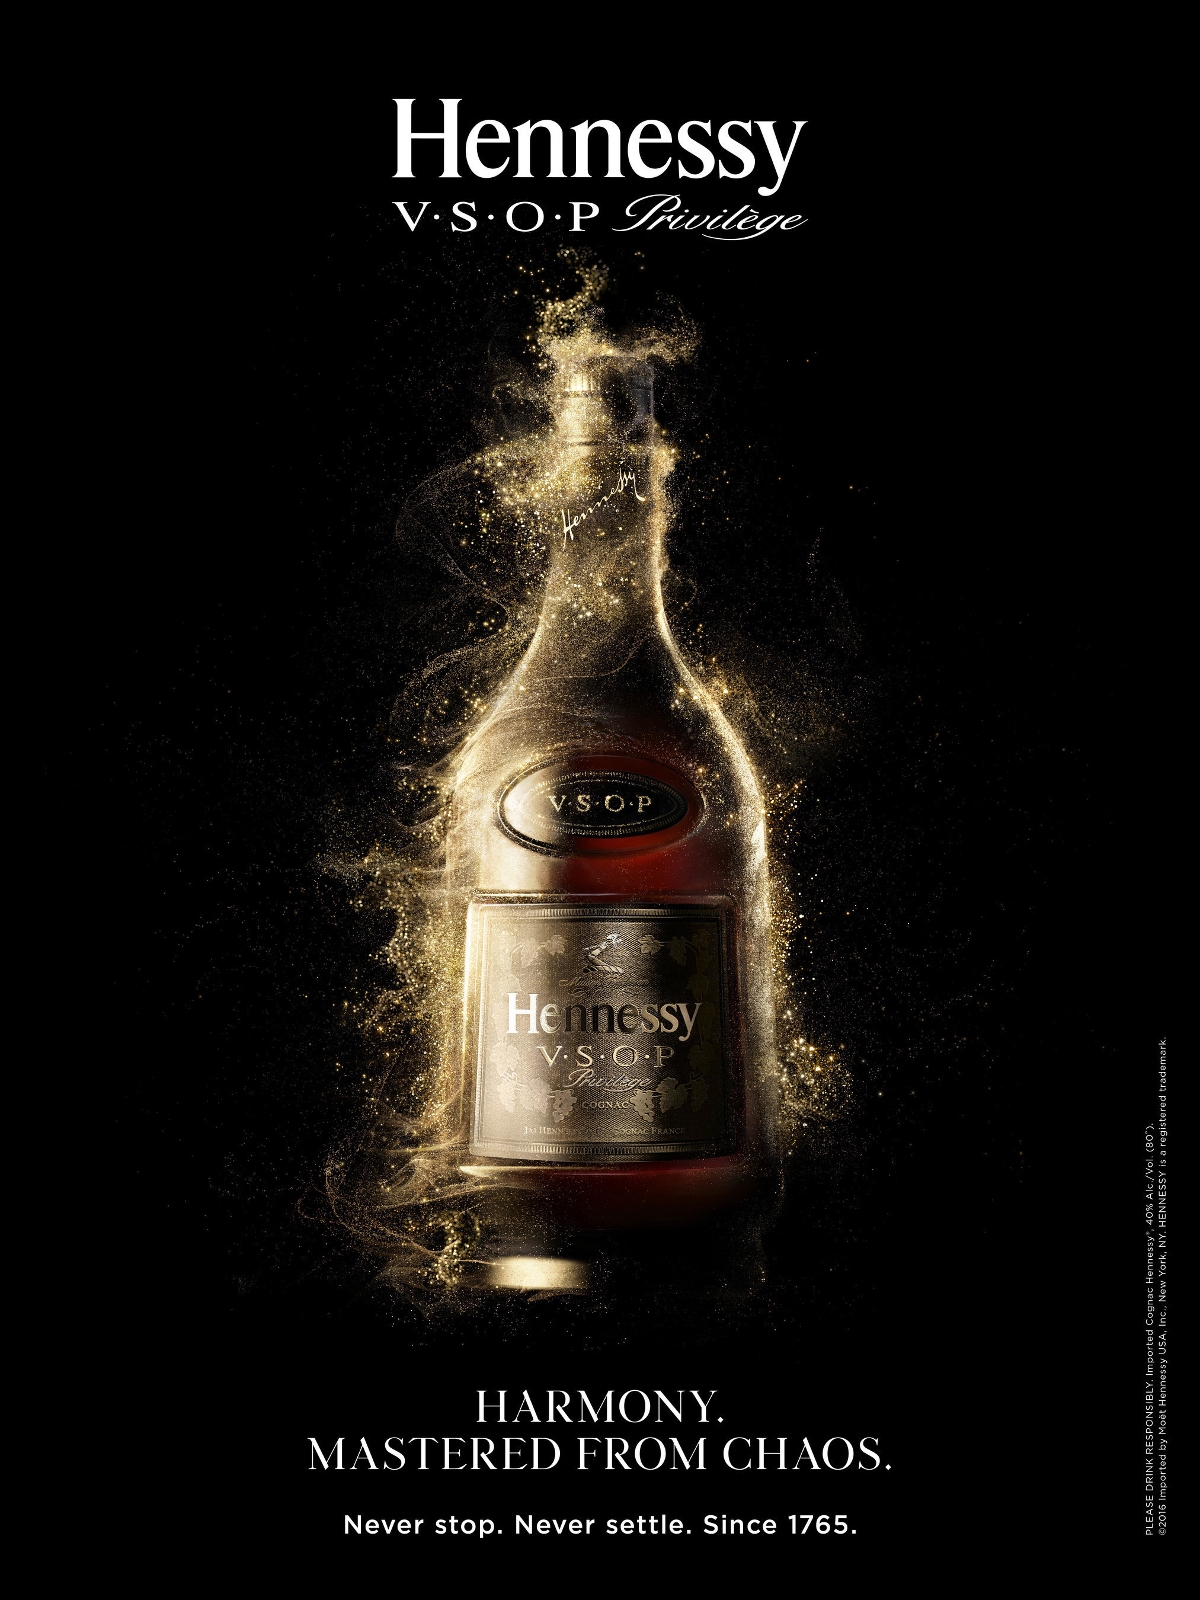 Moet Hennessy USA - New York, NY - Local Business